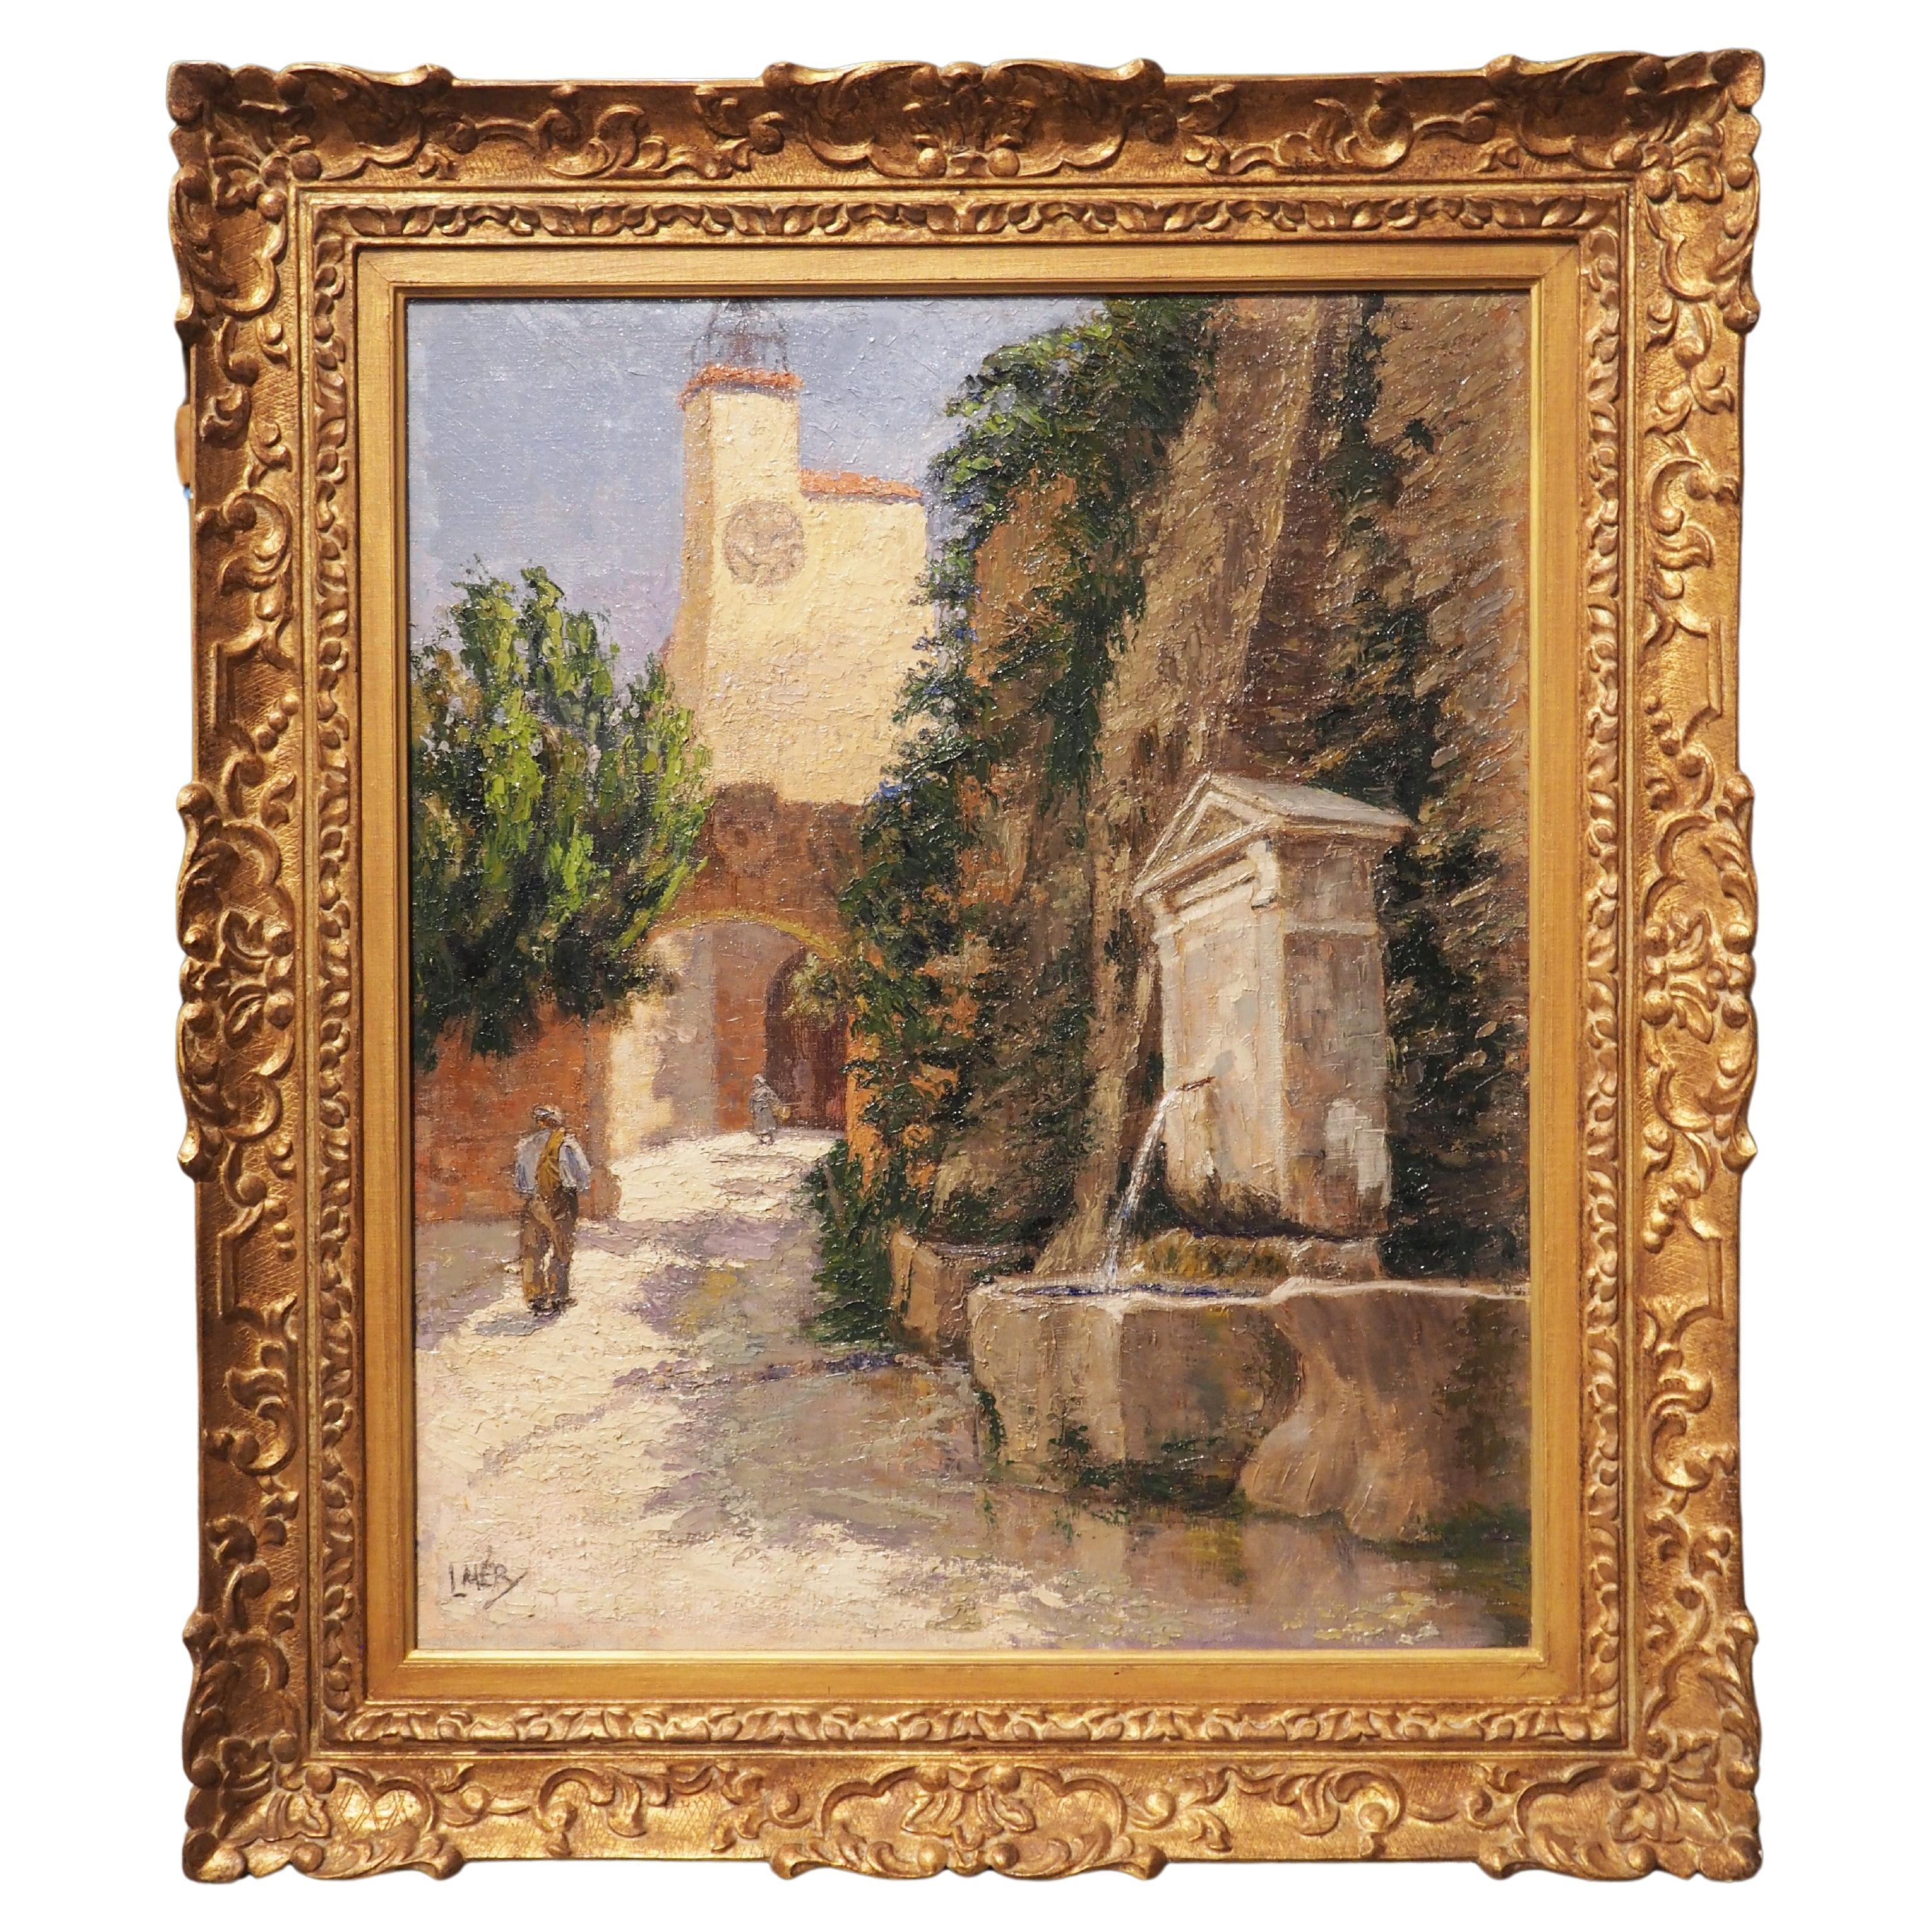 French Oil on Canvas Painting of a Street Fountain in Provence, Signed L. Mery